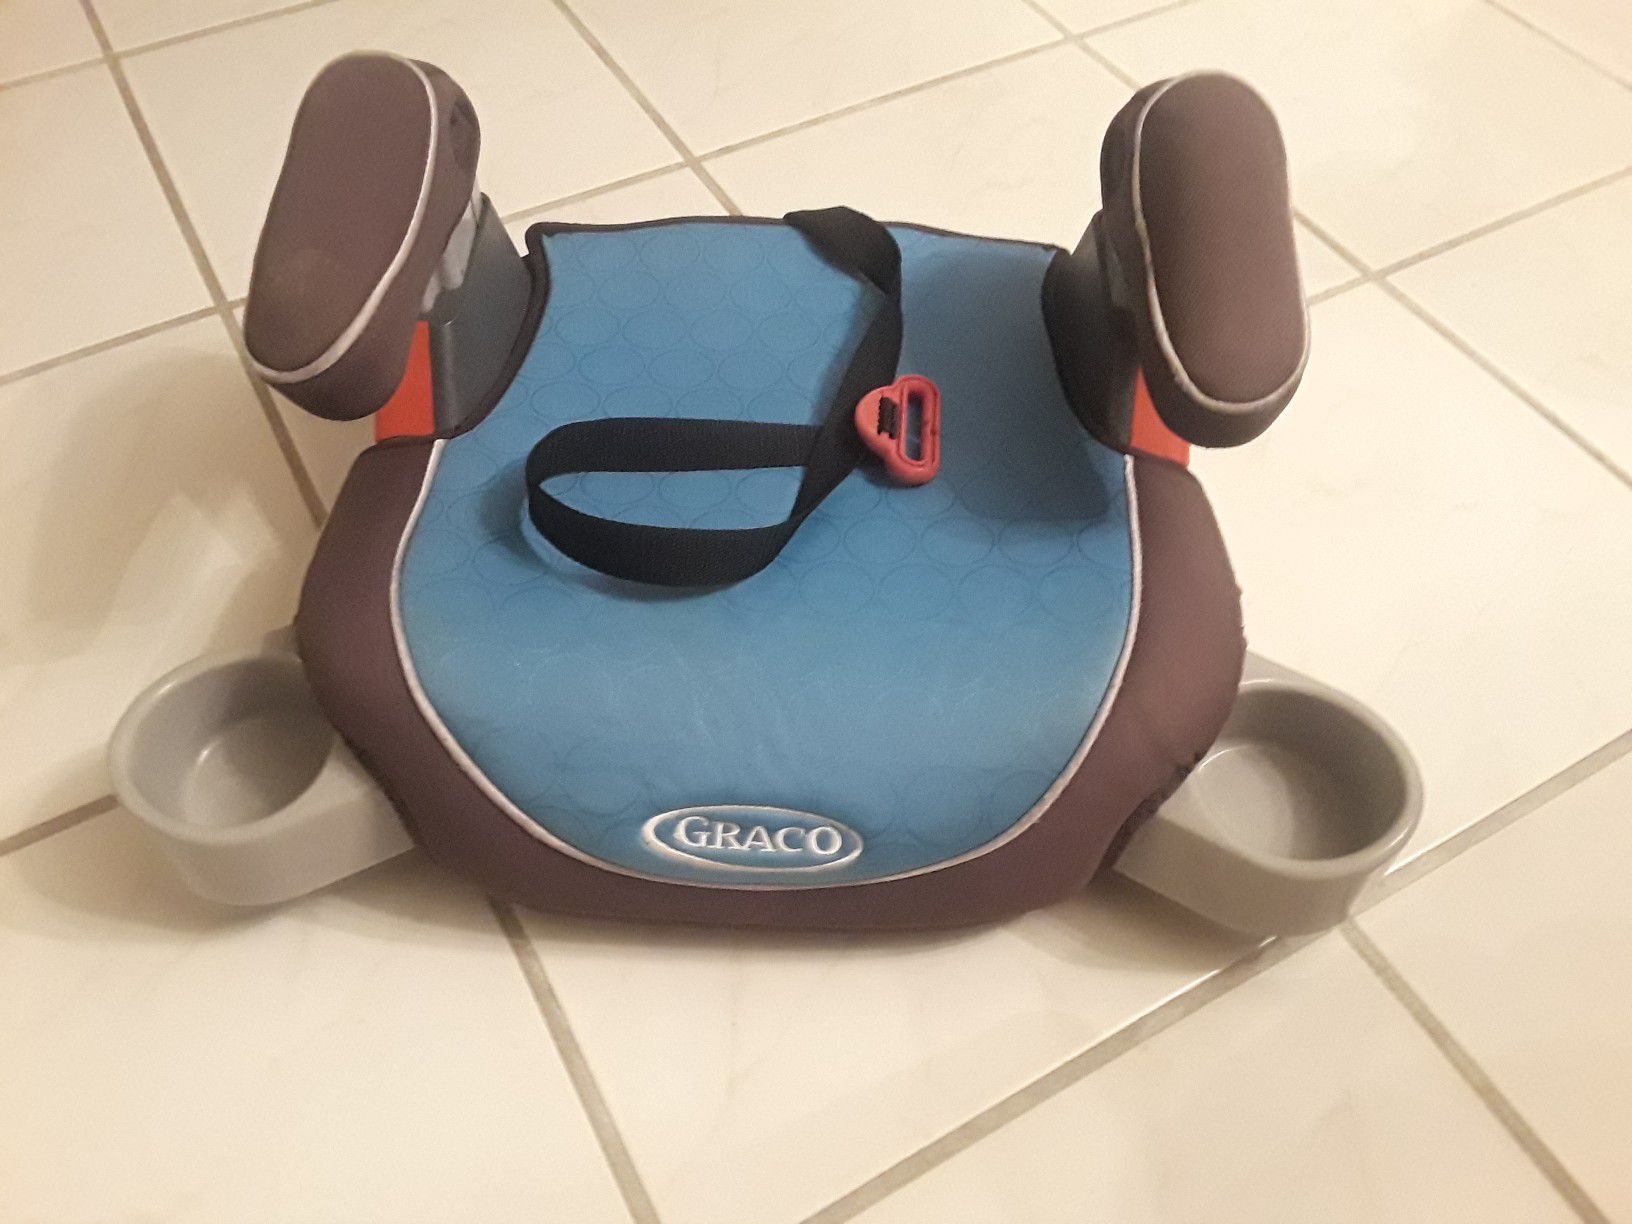 GRACO CAR TURBO child kid BOOSTER SEAT